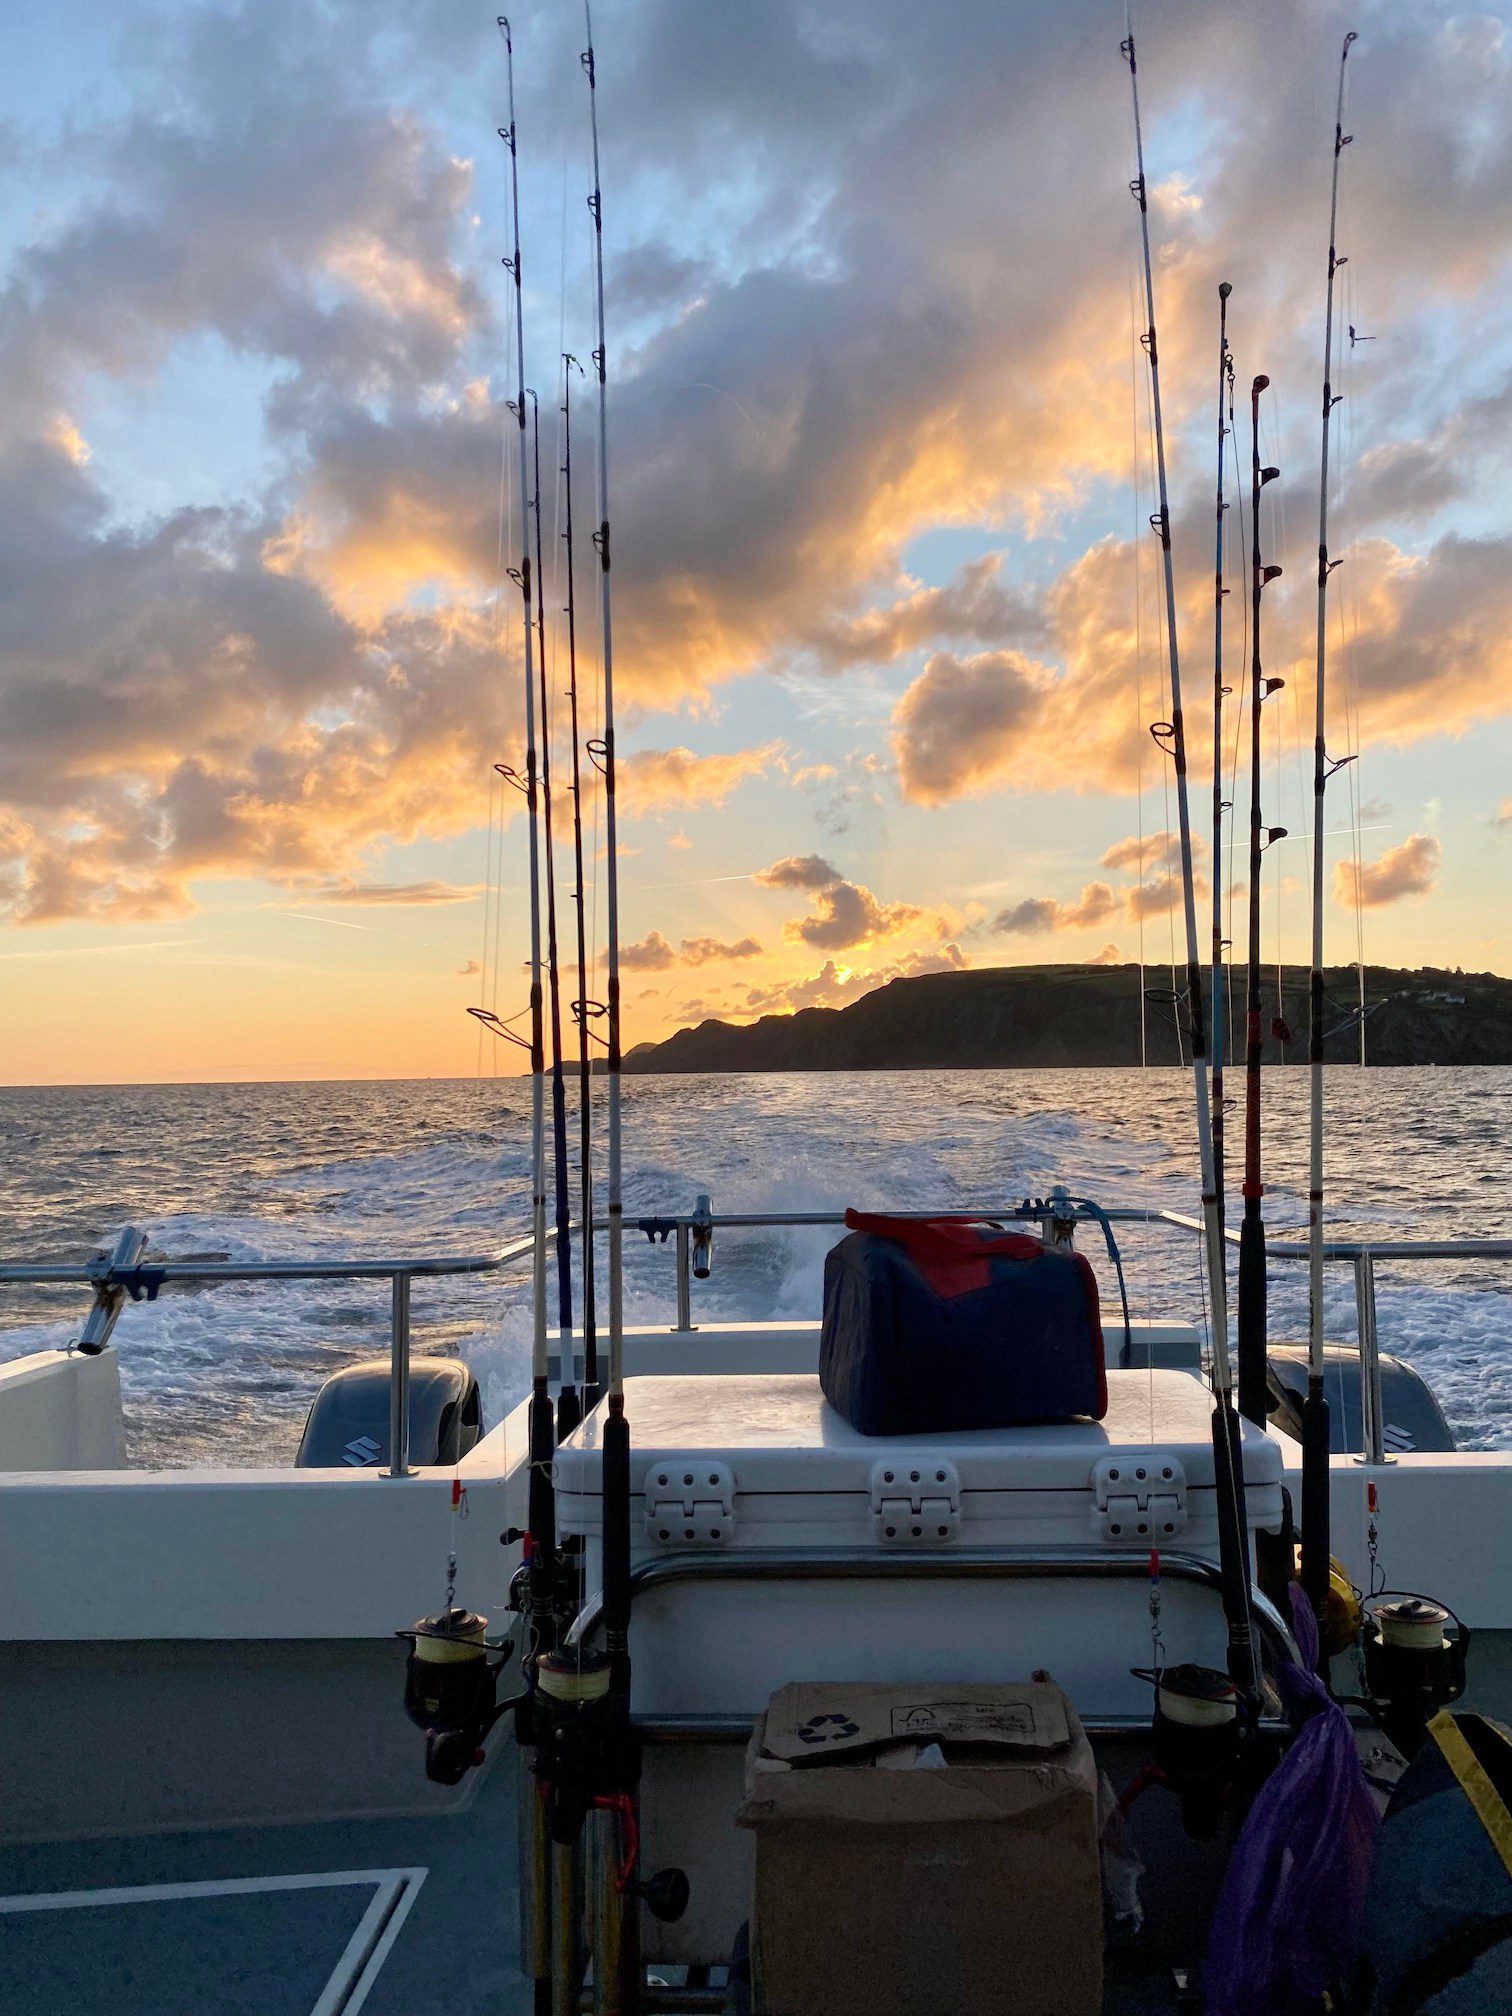 Porbeagle the Reel Deal - North Devon & Exmoor Angling News - The latest up  to date information